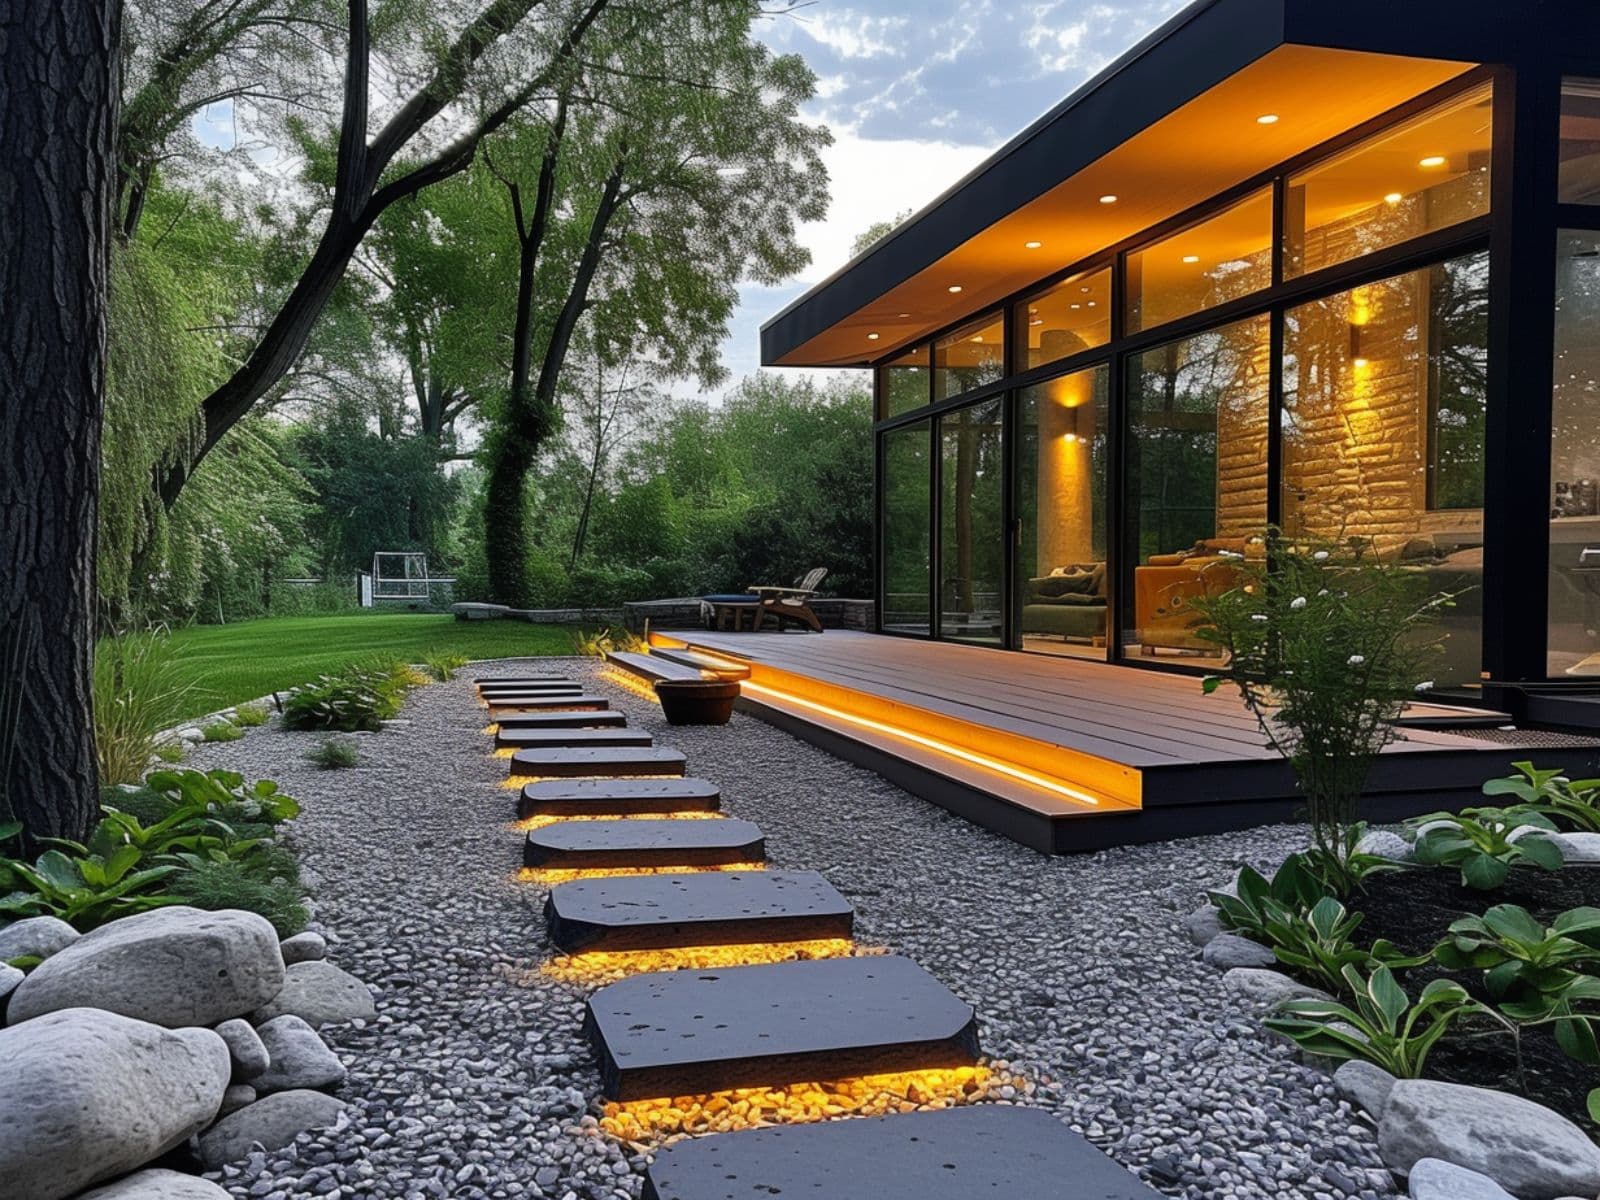 Integrated pathway lights in a garden